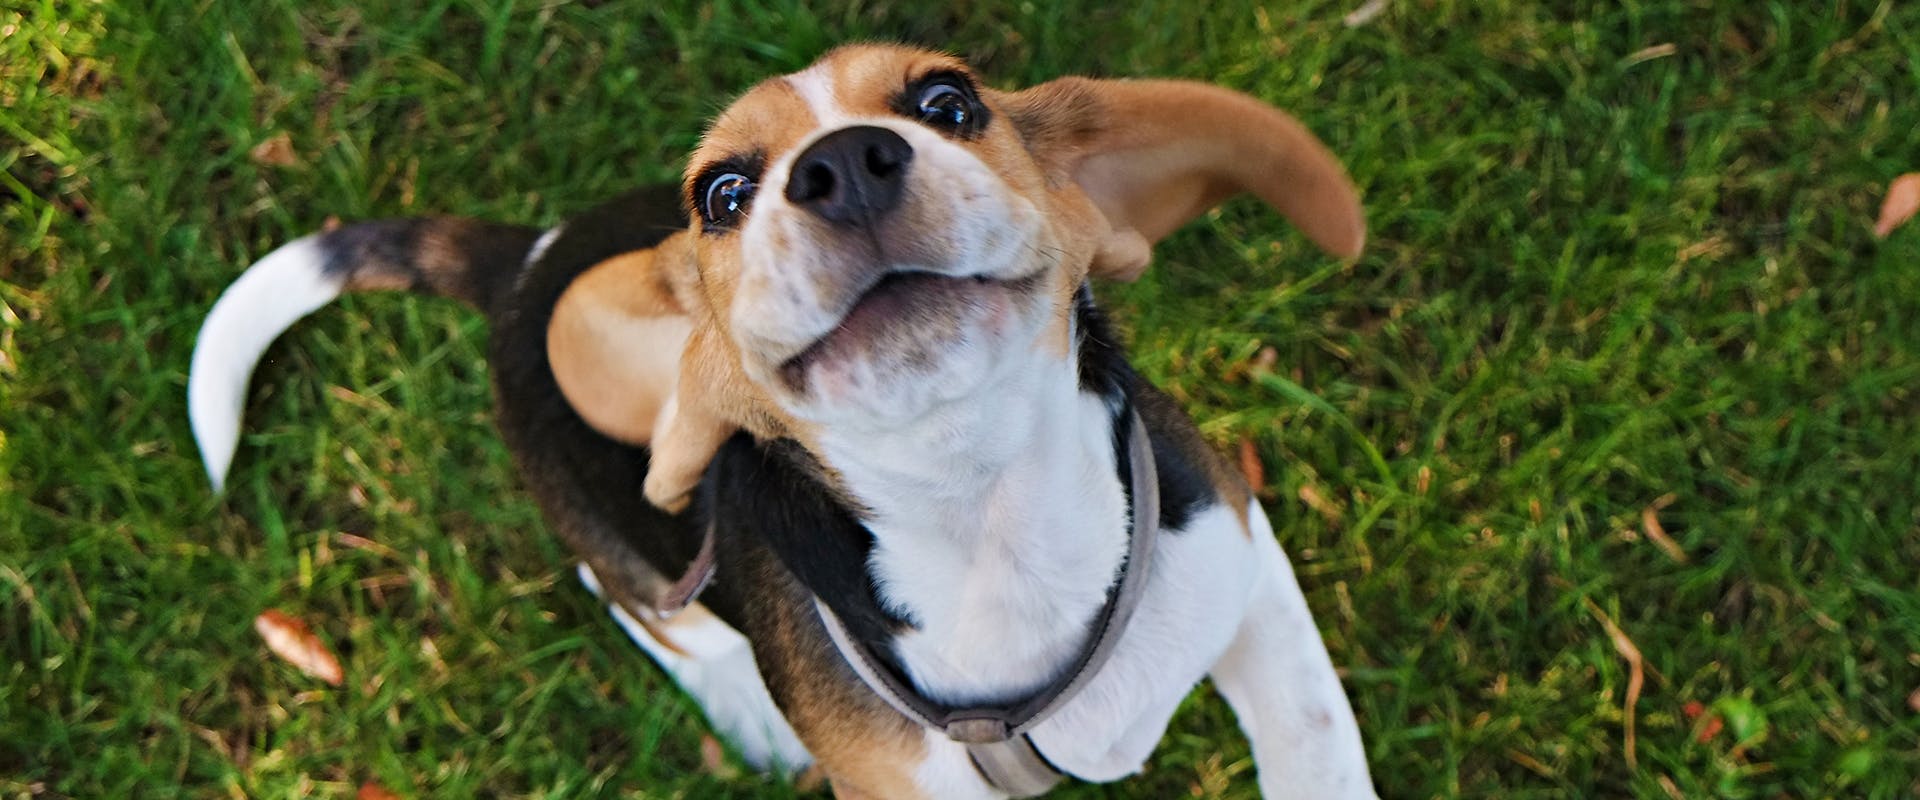 An excited Beagle jumping up towards the camera